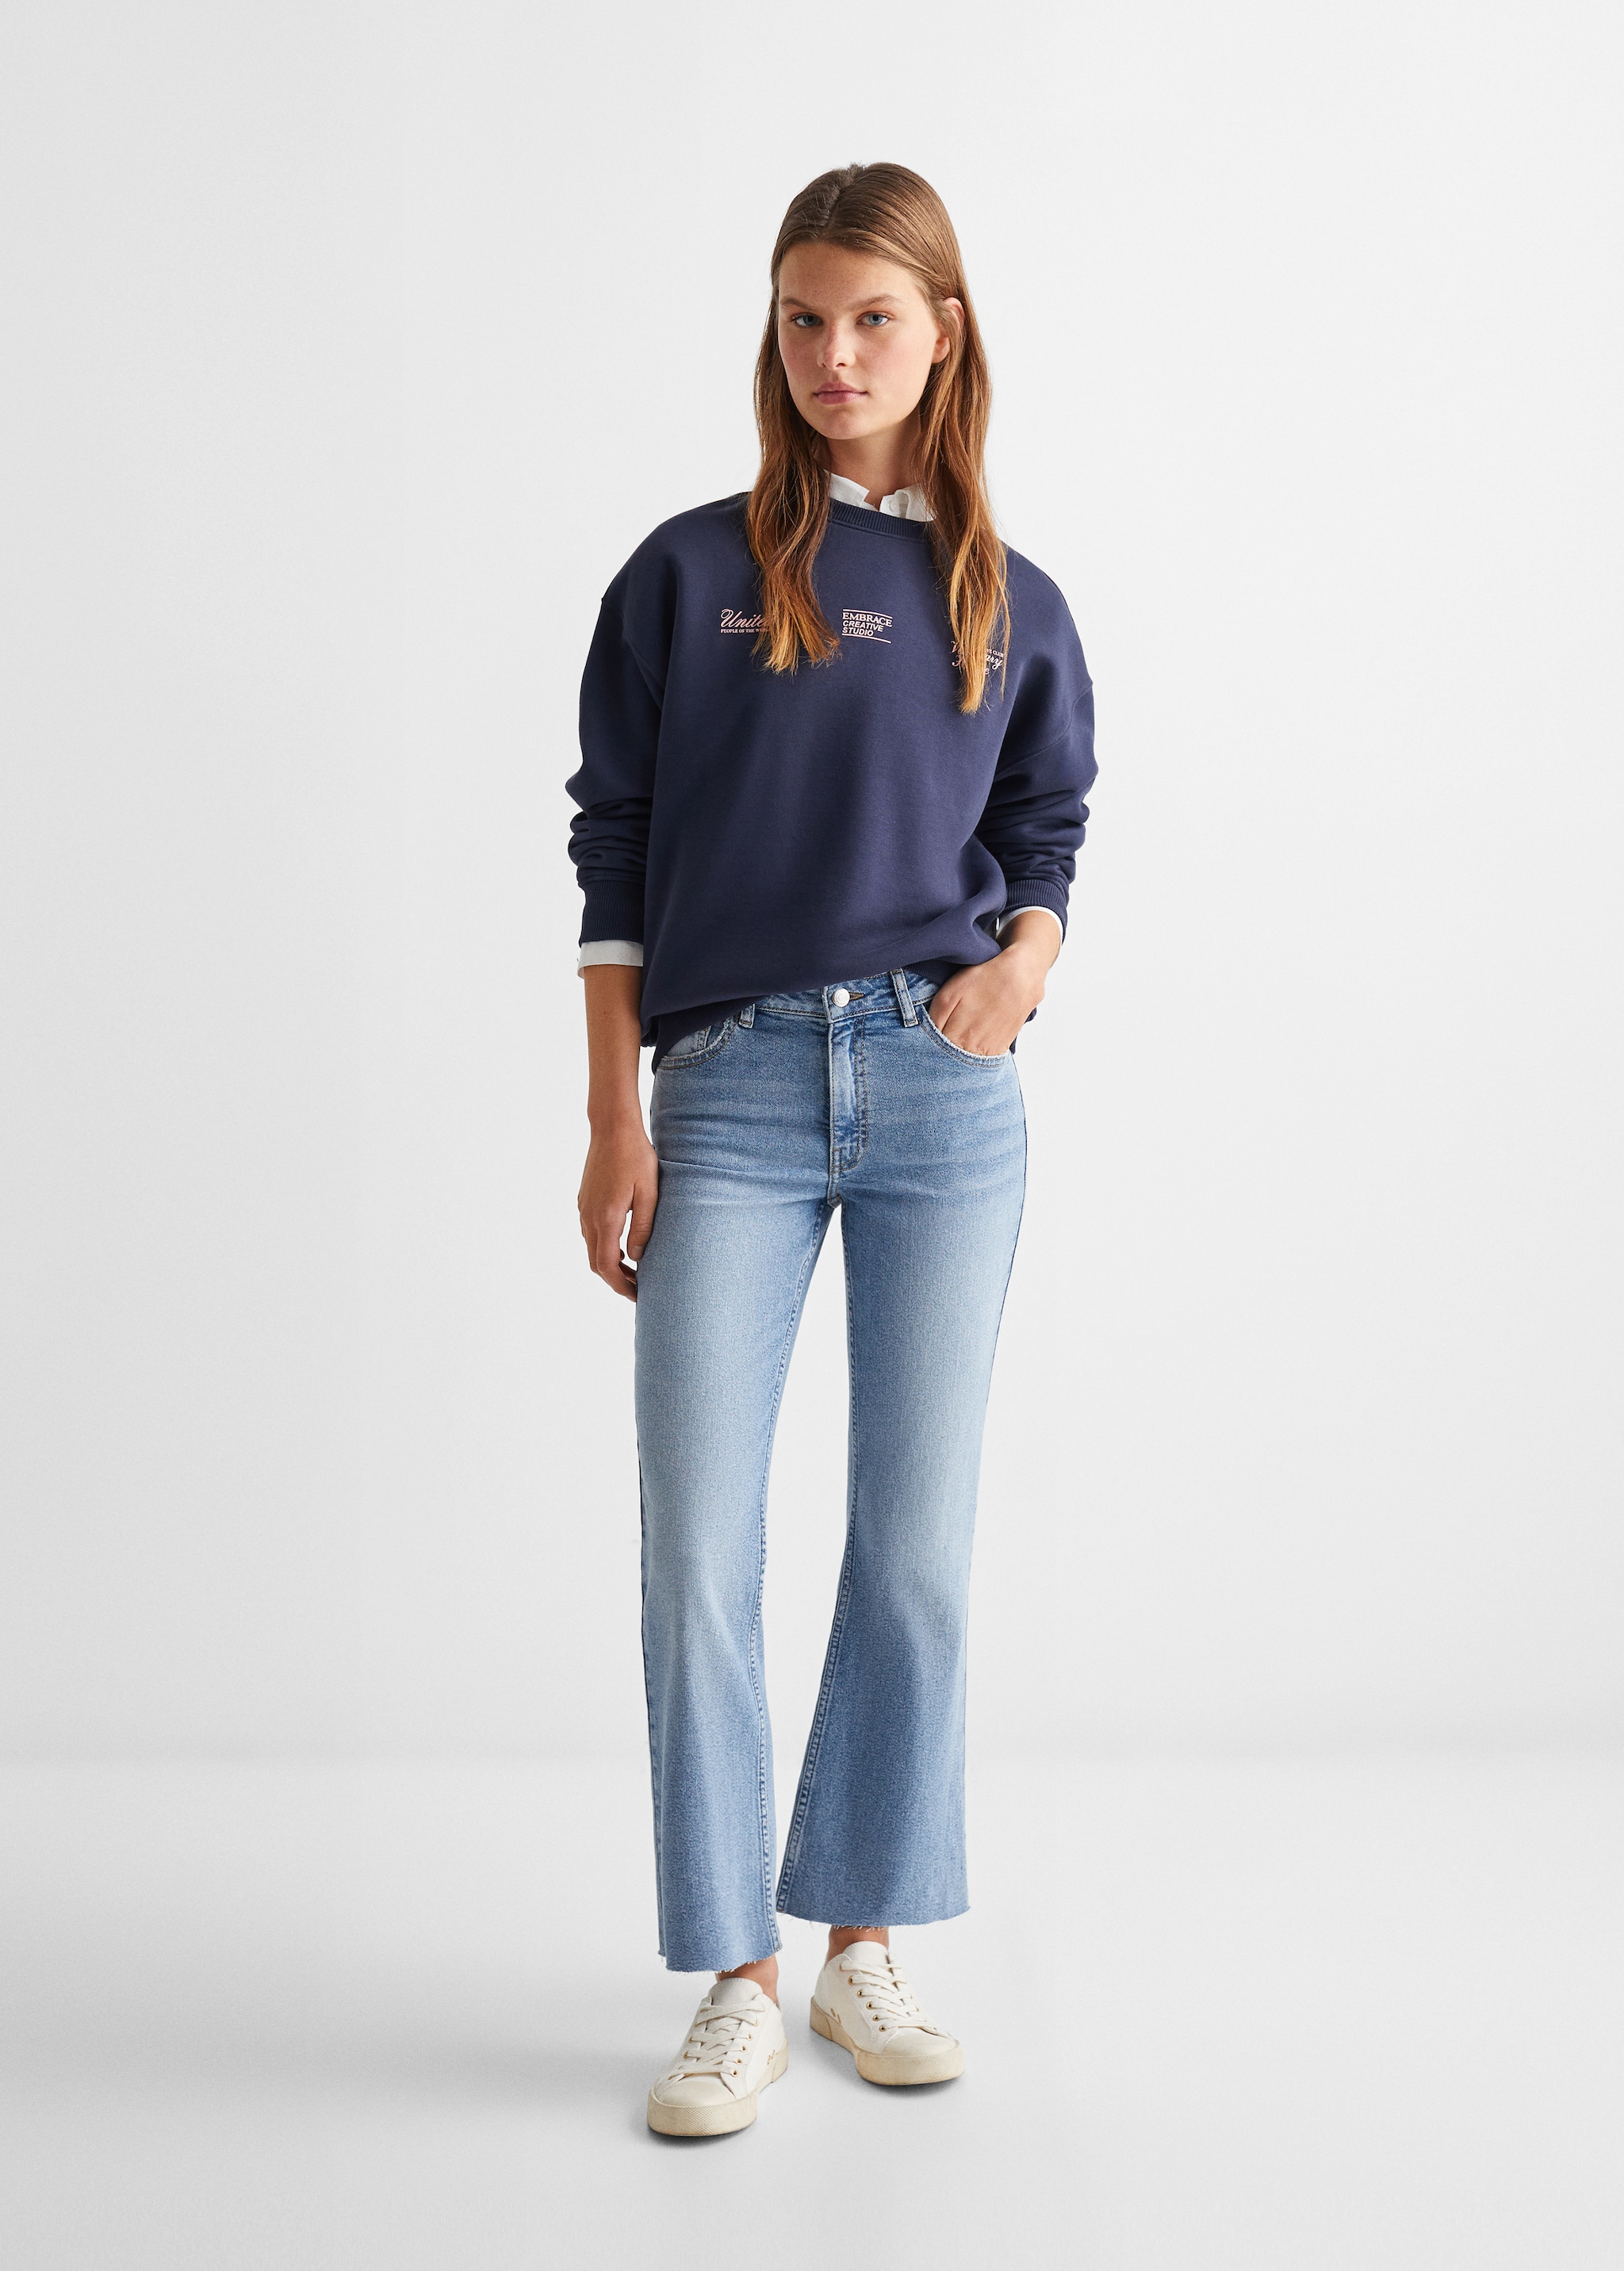 Jeans flare crop - Plano general